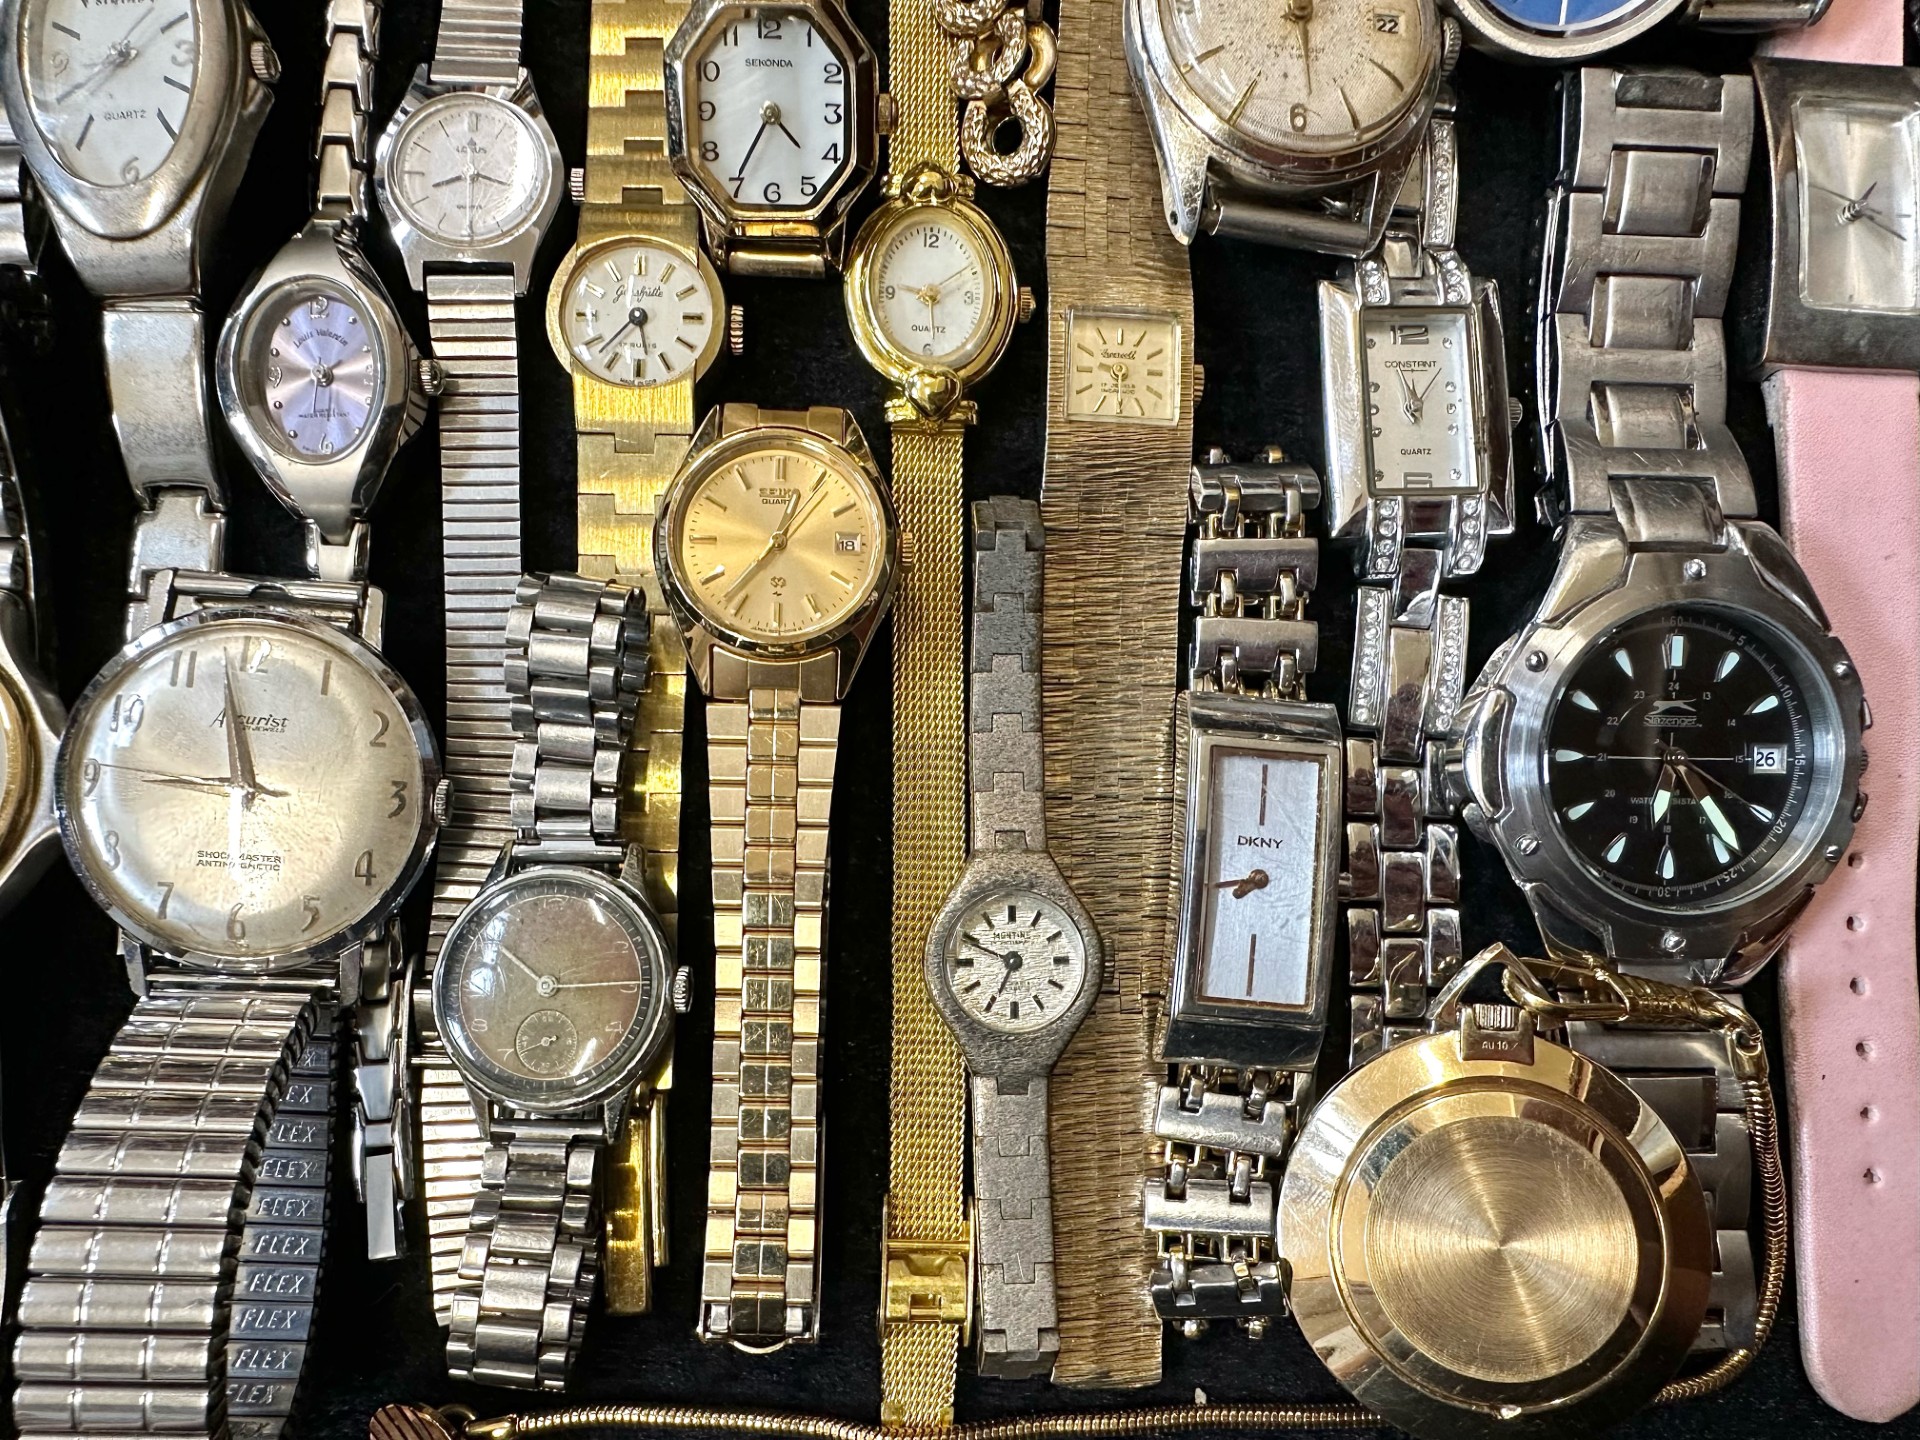 Collection of Ladies & Gentlemen's Wristwatches, leather and bracelet straps, various makes - Image 2 of 5